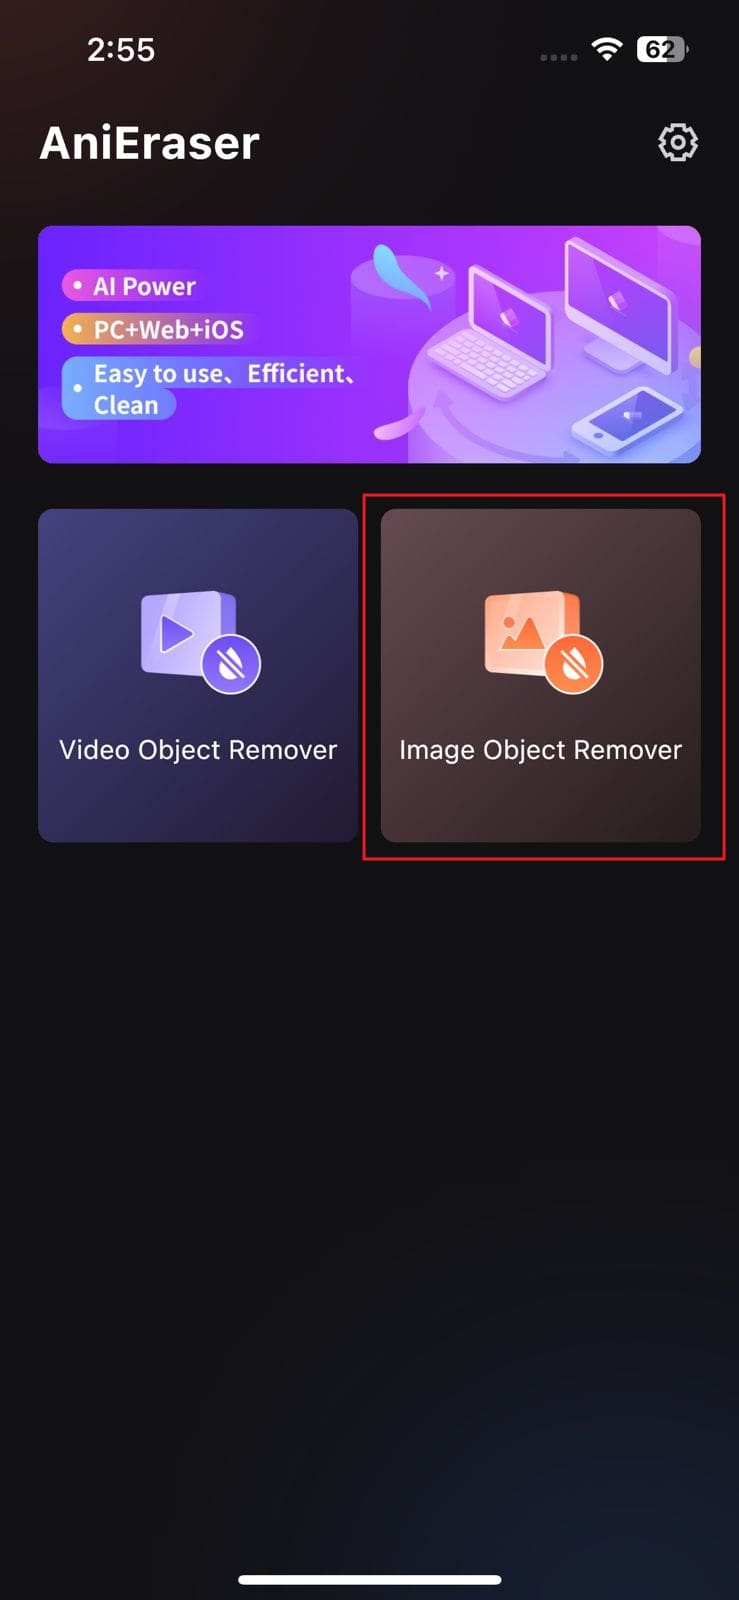 choose image object removal tool